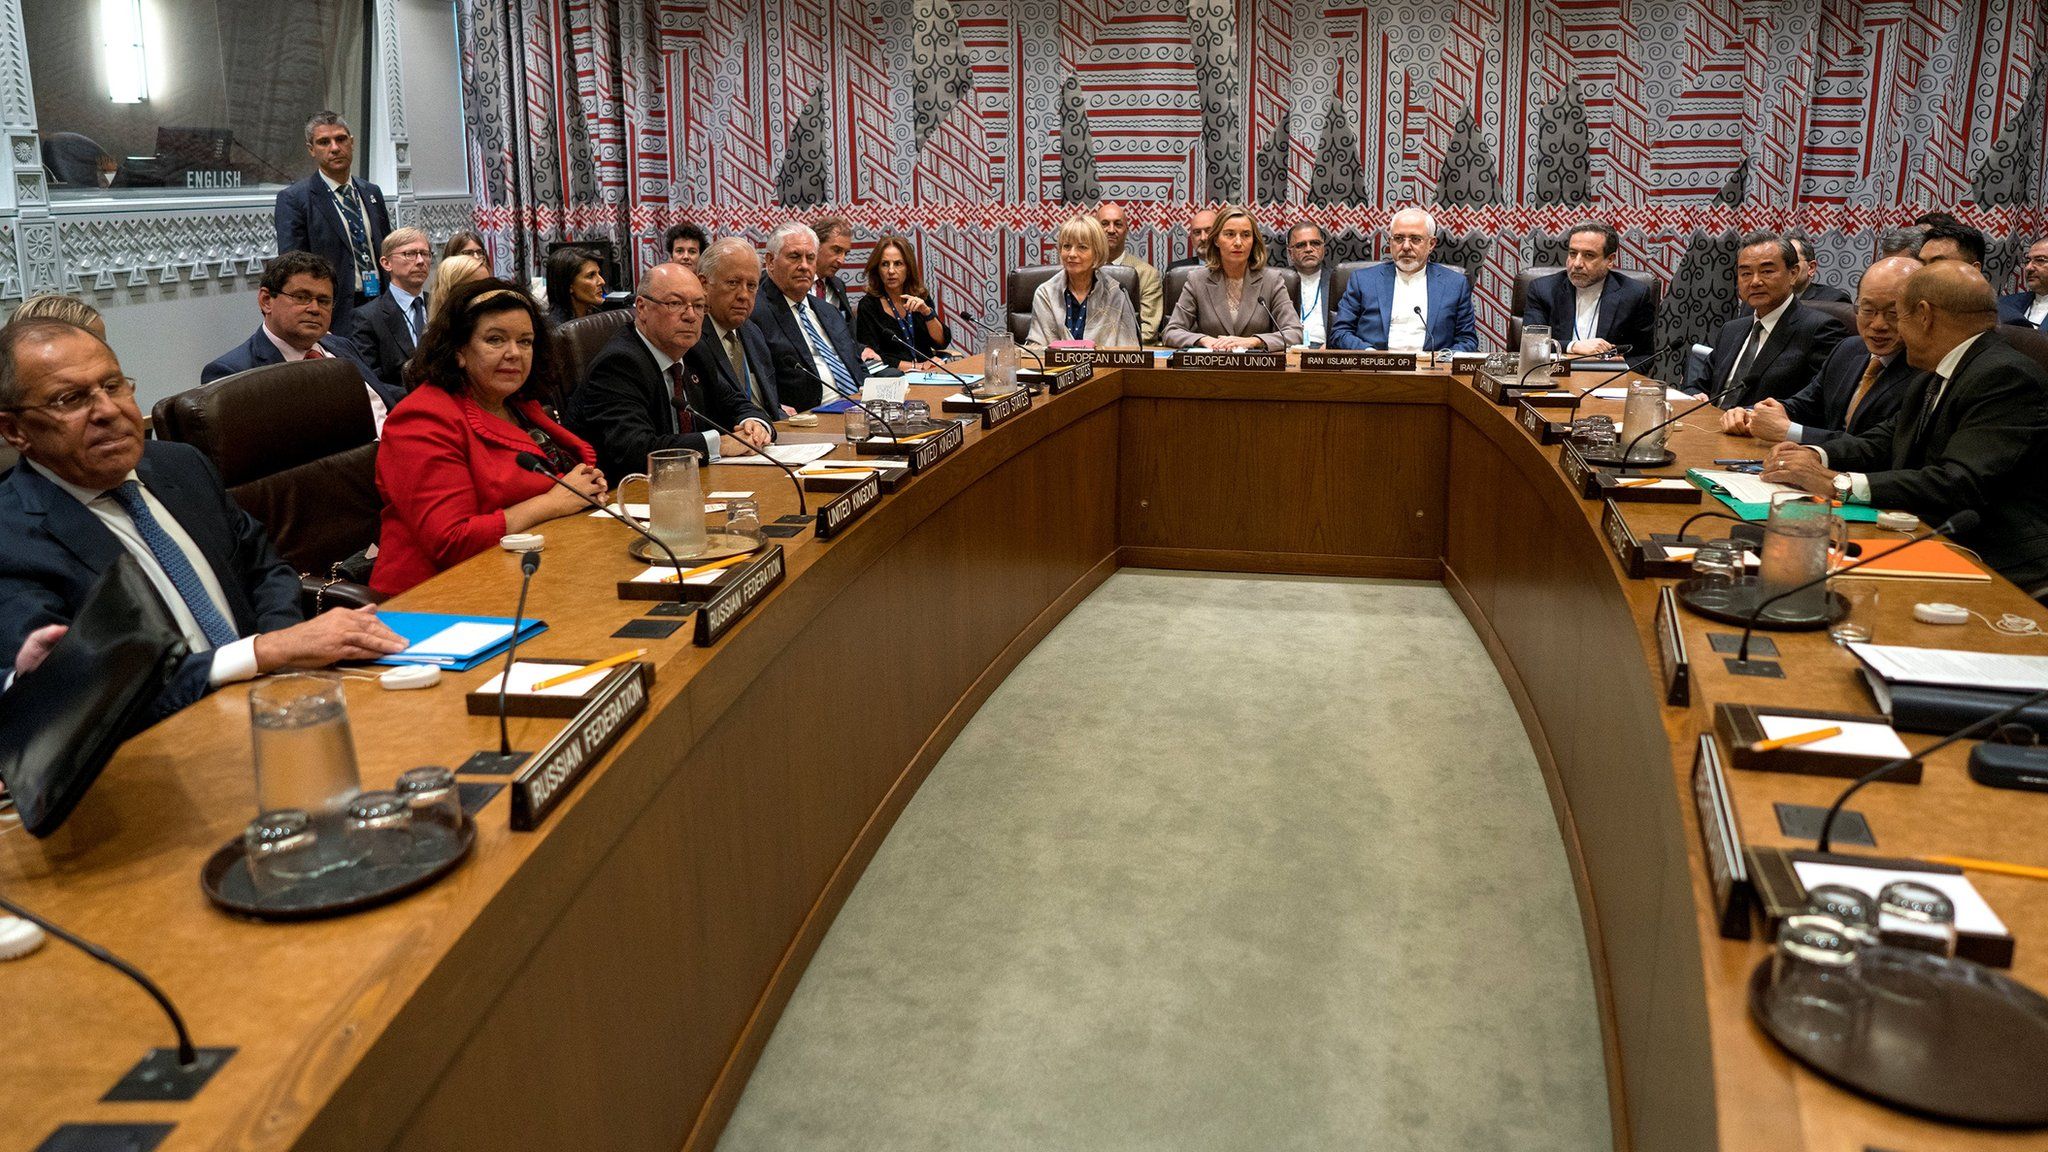 Foreign ministers and other delegates to the seven-party talks at the UN in New York - 20 September